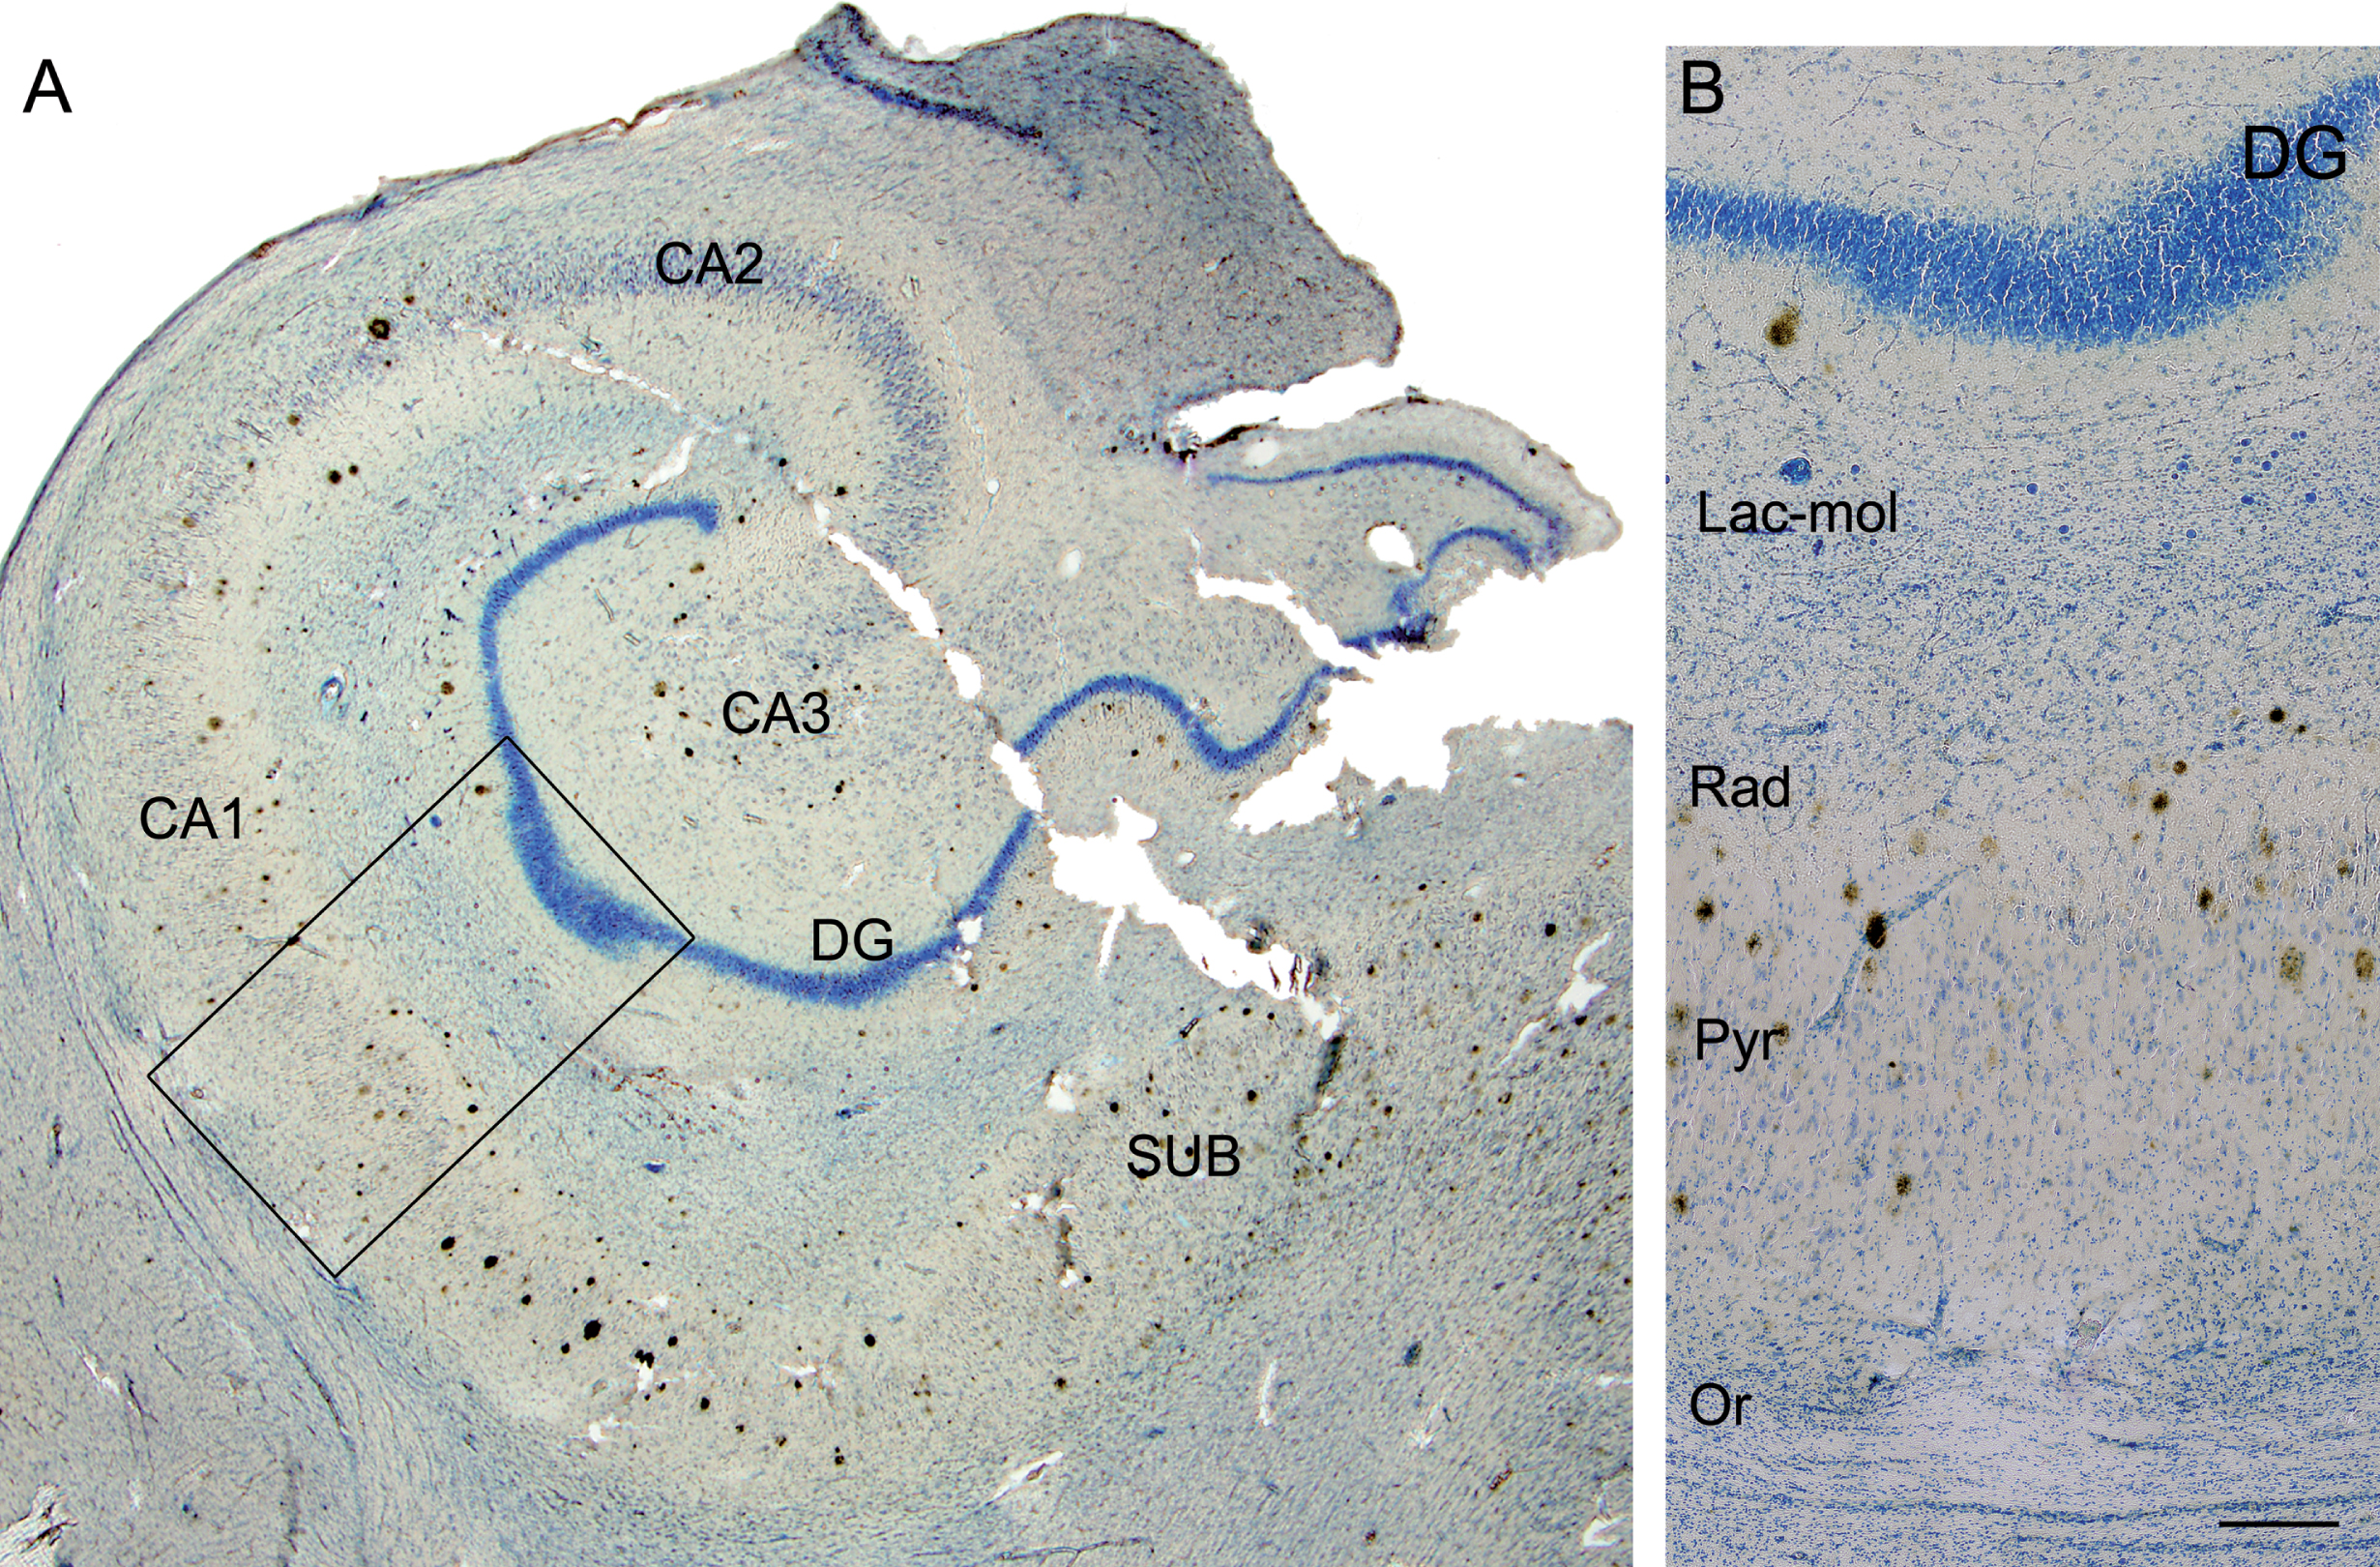 Photomicrograph of the hippocampal formation from an AD patient in a double-stained section (Nissl and anti-Aβ). A) Low-power microphotograph to illustrate the hippocampal fields. B) Higher magnification of the boxed area in A, showing the distribution of plaques by layer in CA1 (Lac-mol, stratum lacunosum-moleculare; Rad, stratum radiatum; Pyr, stratum pyramidale; Or, stratum oriens). Note that no plaques are visualized in stratum lacunosum-moleculare or in oriens. DG, dentate gyrus; CA1–CA3, cornus ammonis fields; SUB, subiculum. Scale bar: 1000μm (in B); 860μm (in A).